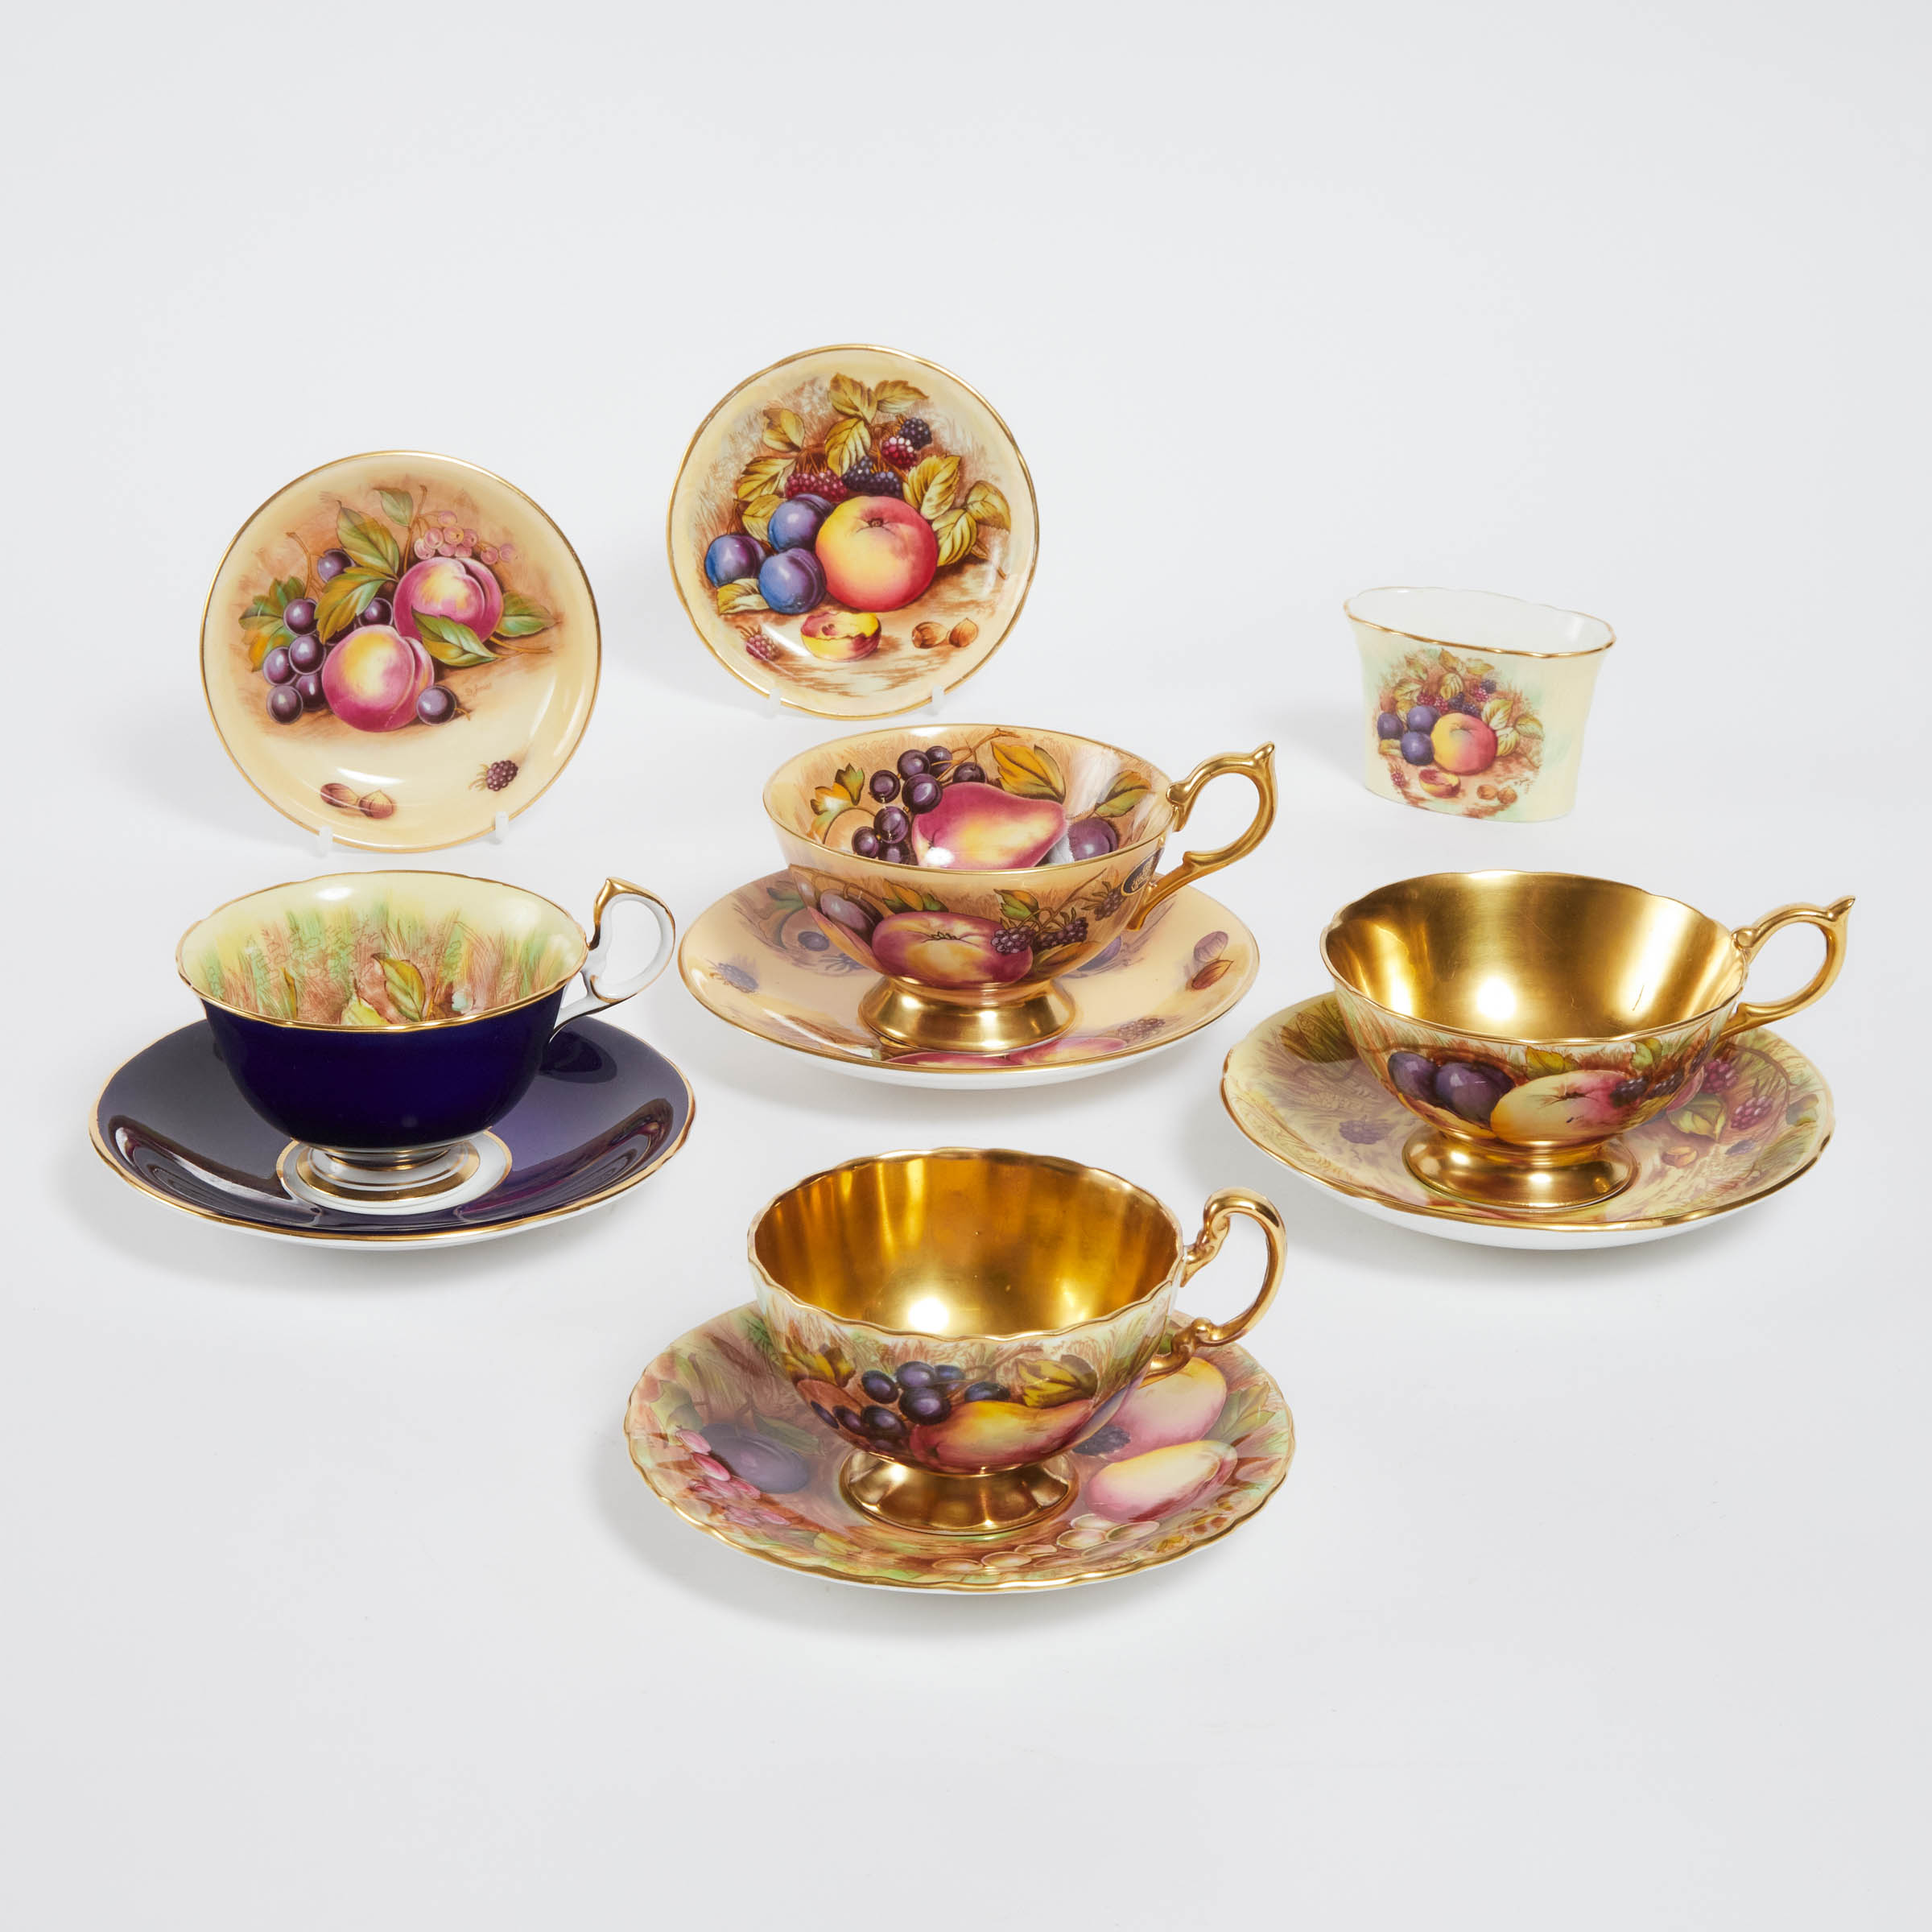 Four Aynsley 'Orchard Gold' Cups and Saucers, Two Dishes, and a Toothpick Holder, D. Jones and N. Brunt, 20th century